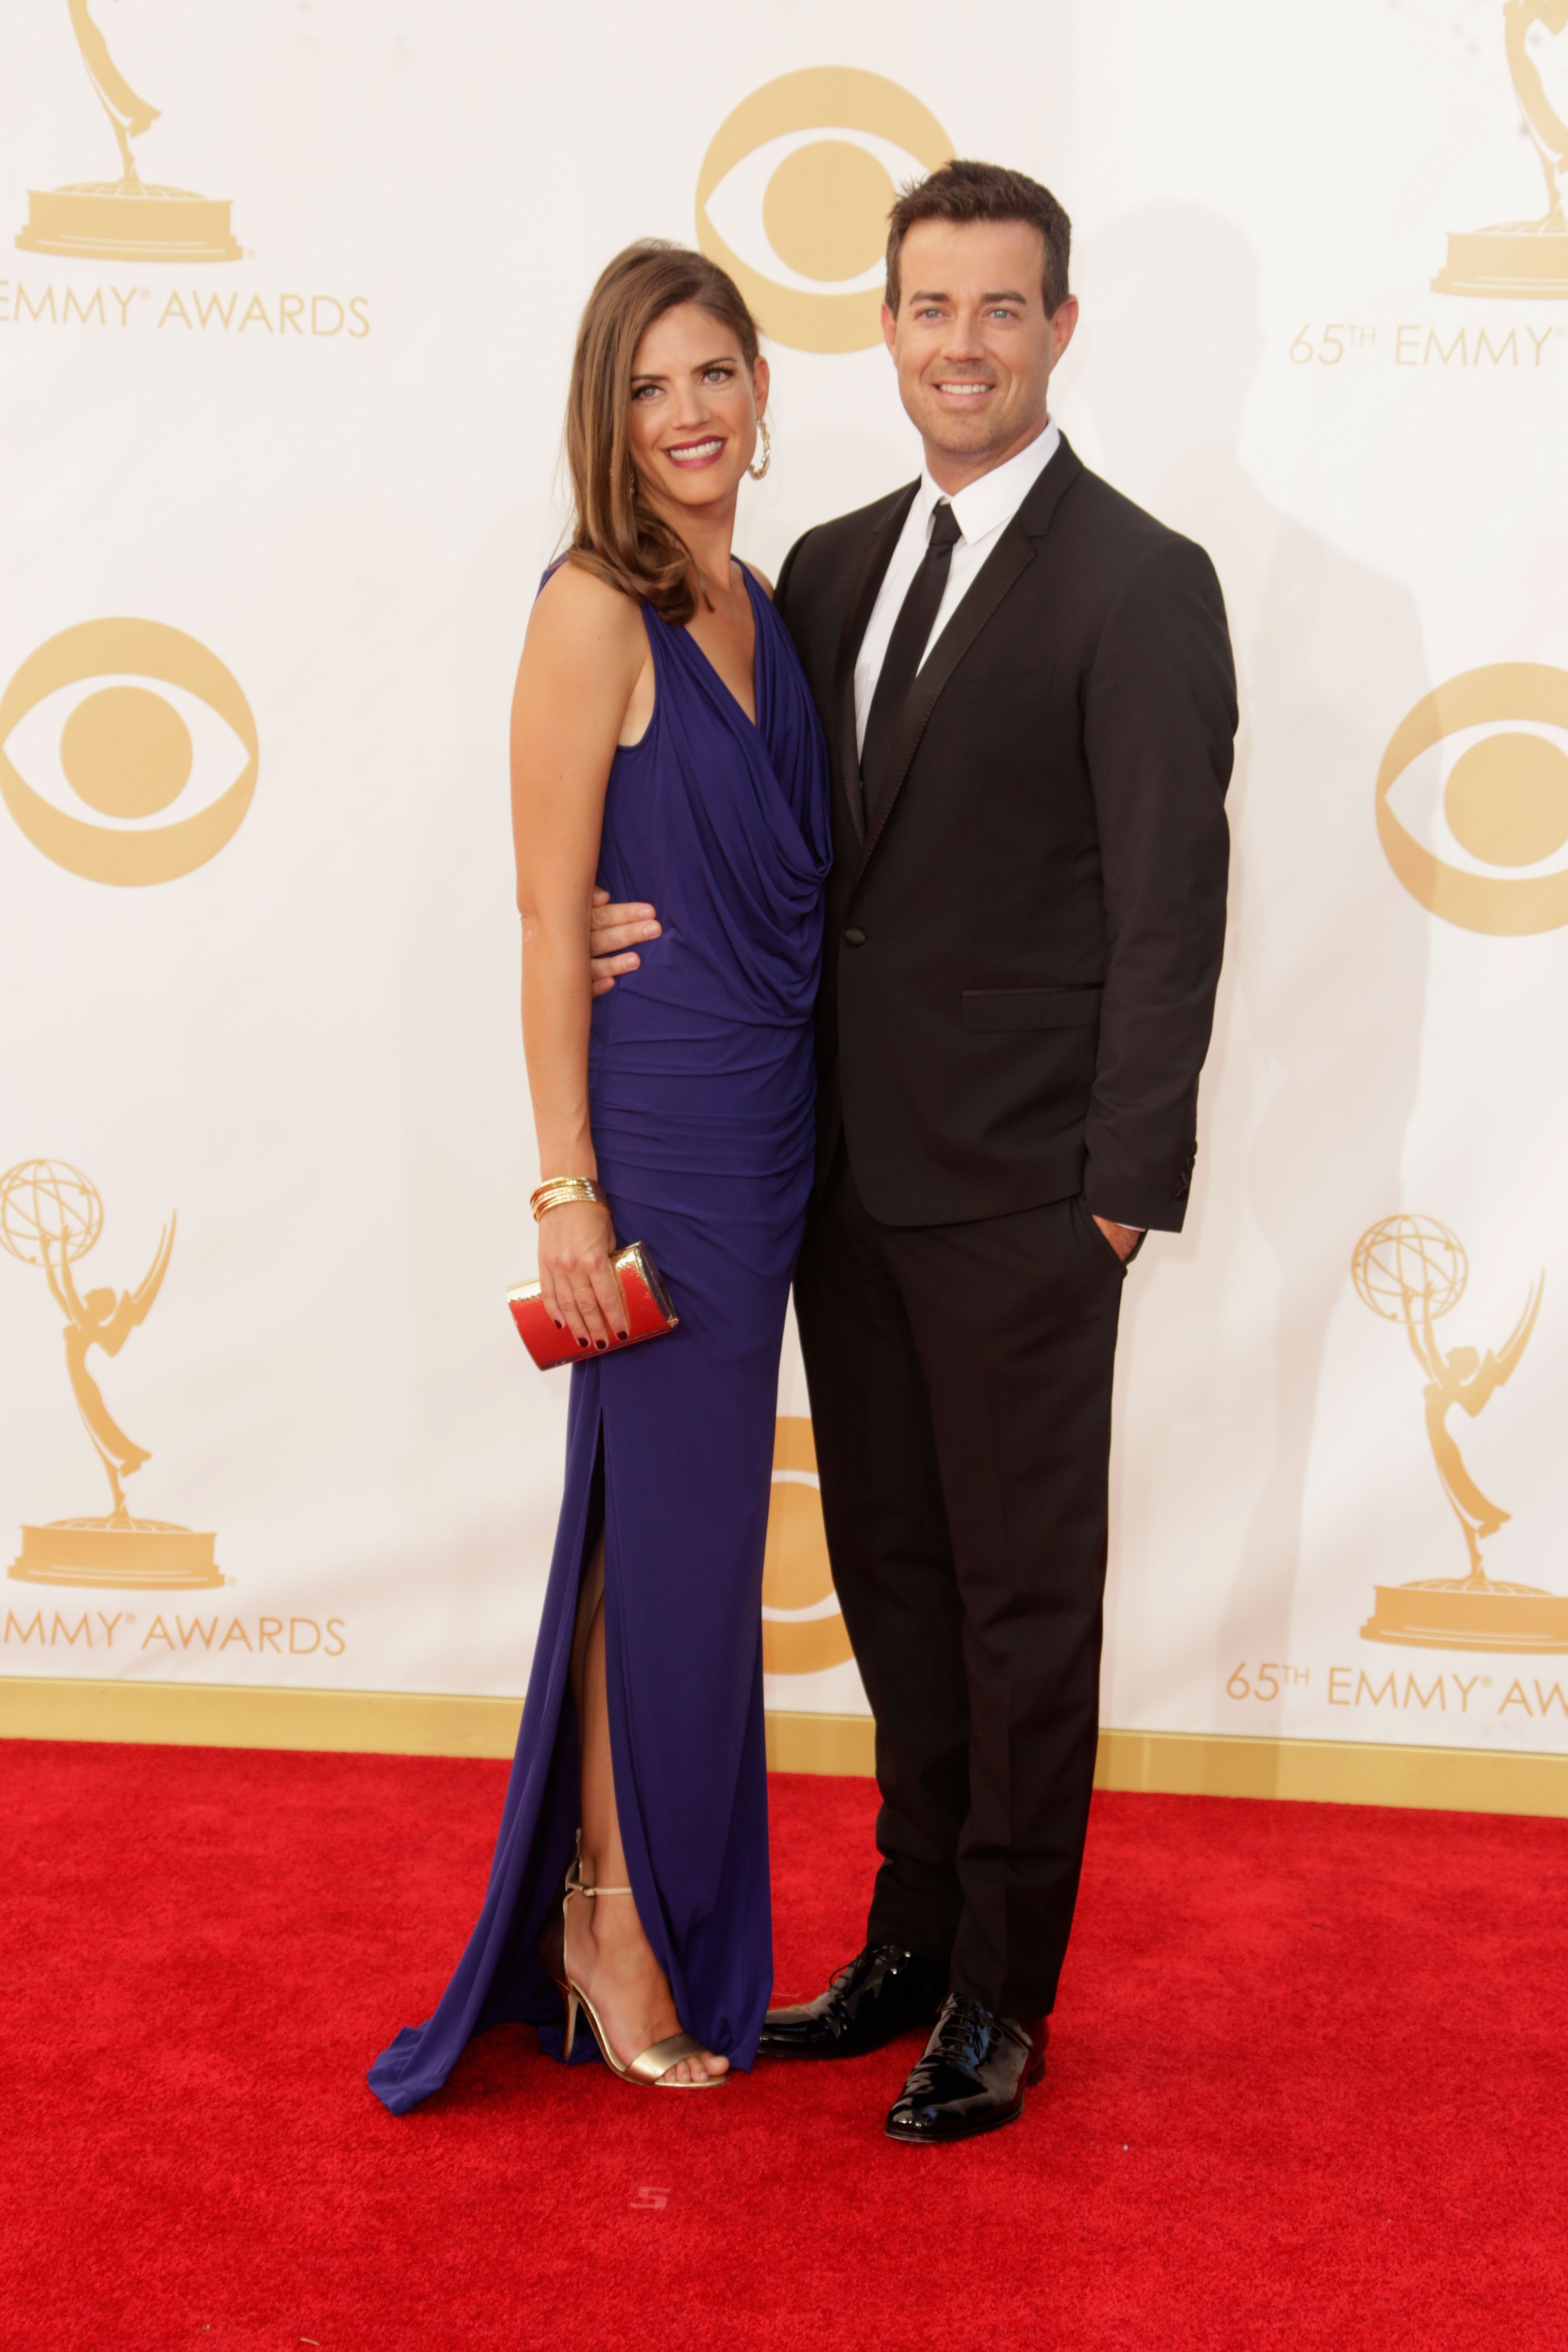 Carson Daly and Siri Pinter arrive at the 65th Annual Primetime Emmy Awards held at Nokia Theatre L.A. Live on September 22, 2013 in Los Angeles, California | Source: Getty Images